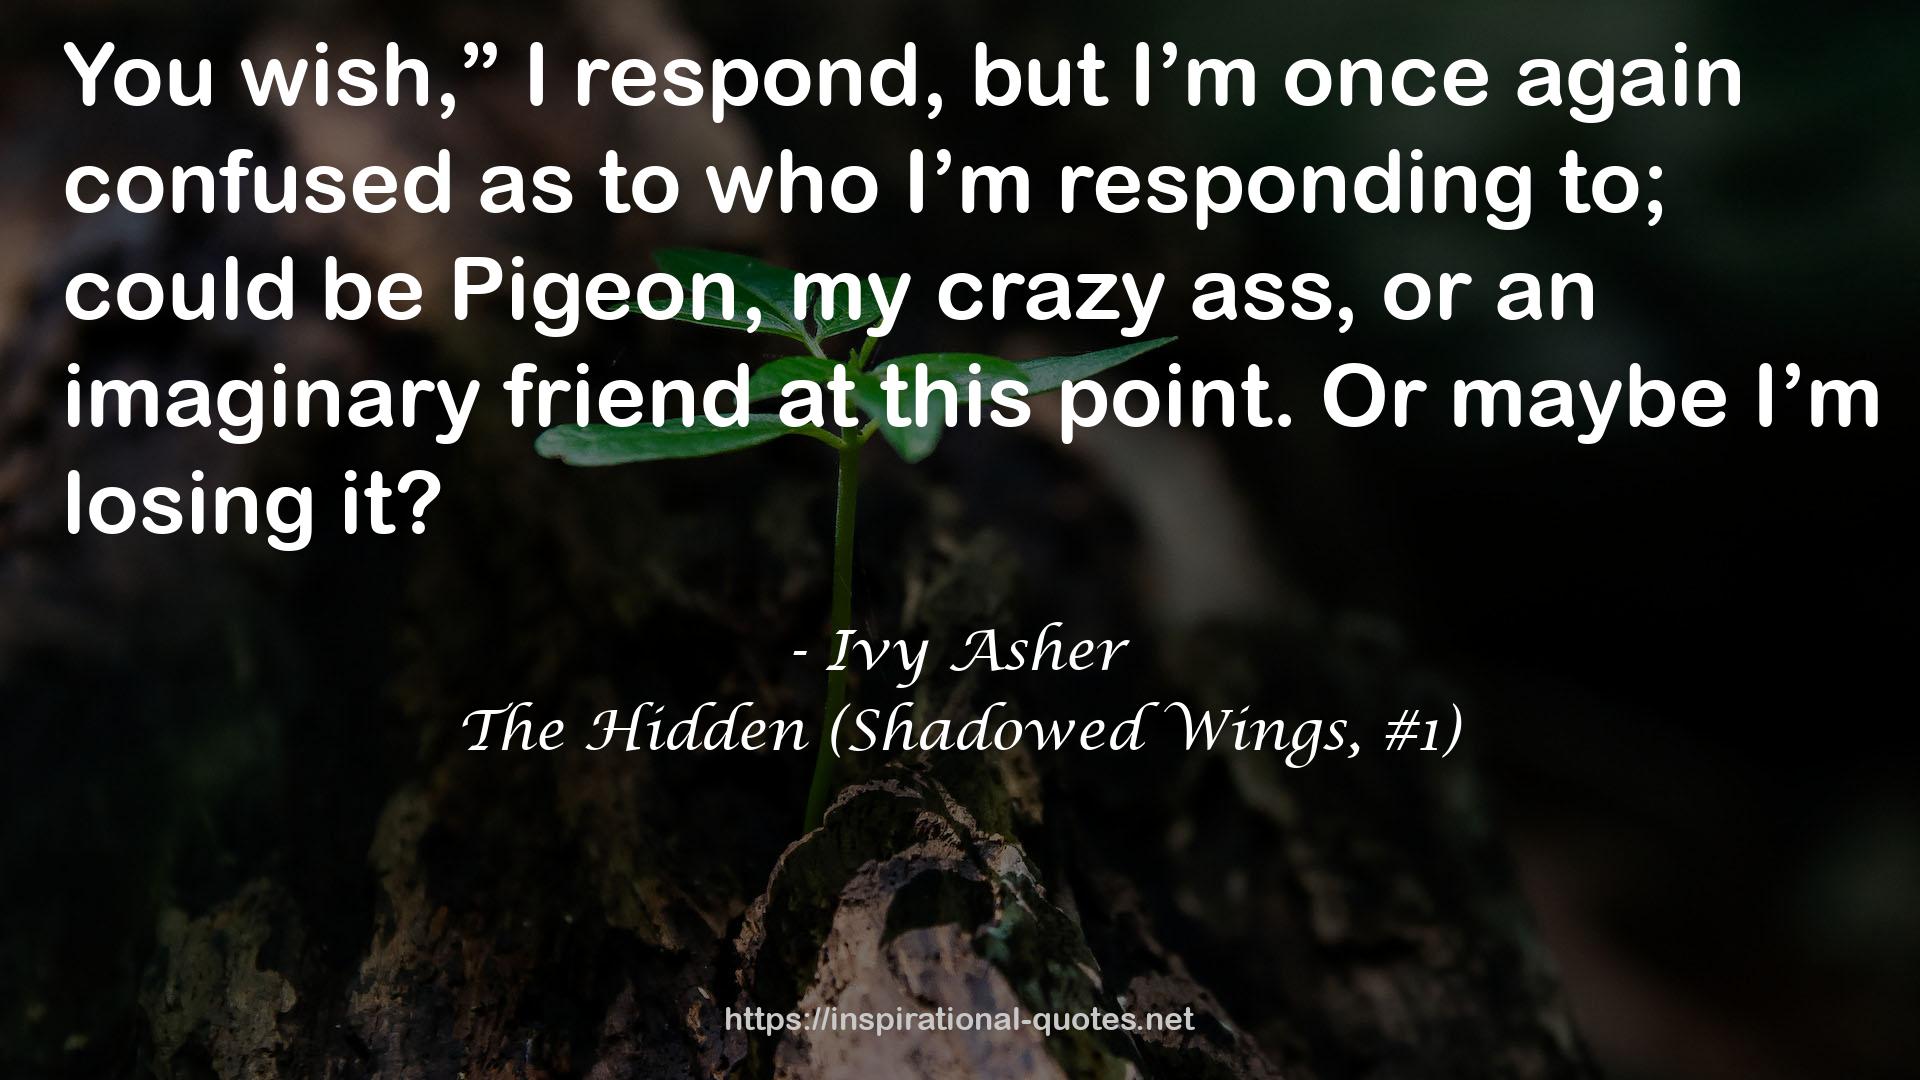 The Hidden (Shadowed Wings, #1) QUOTES